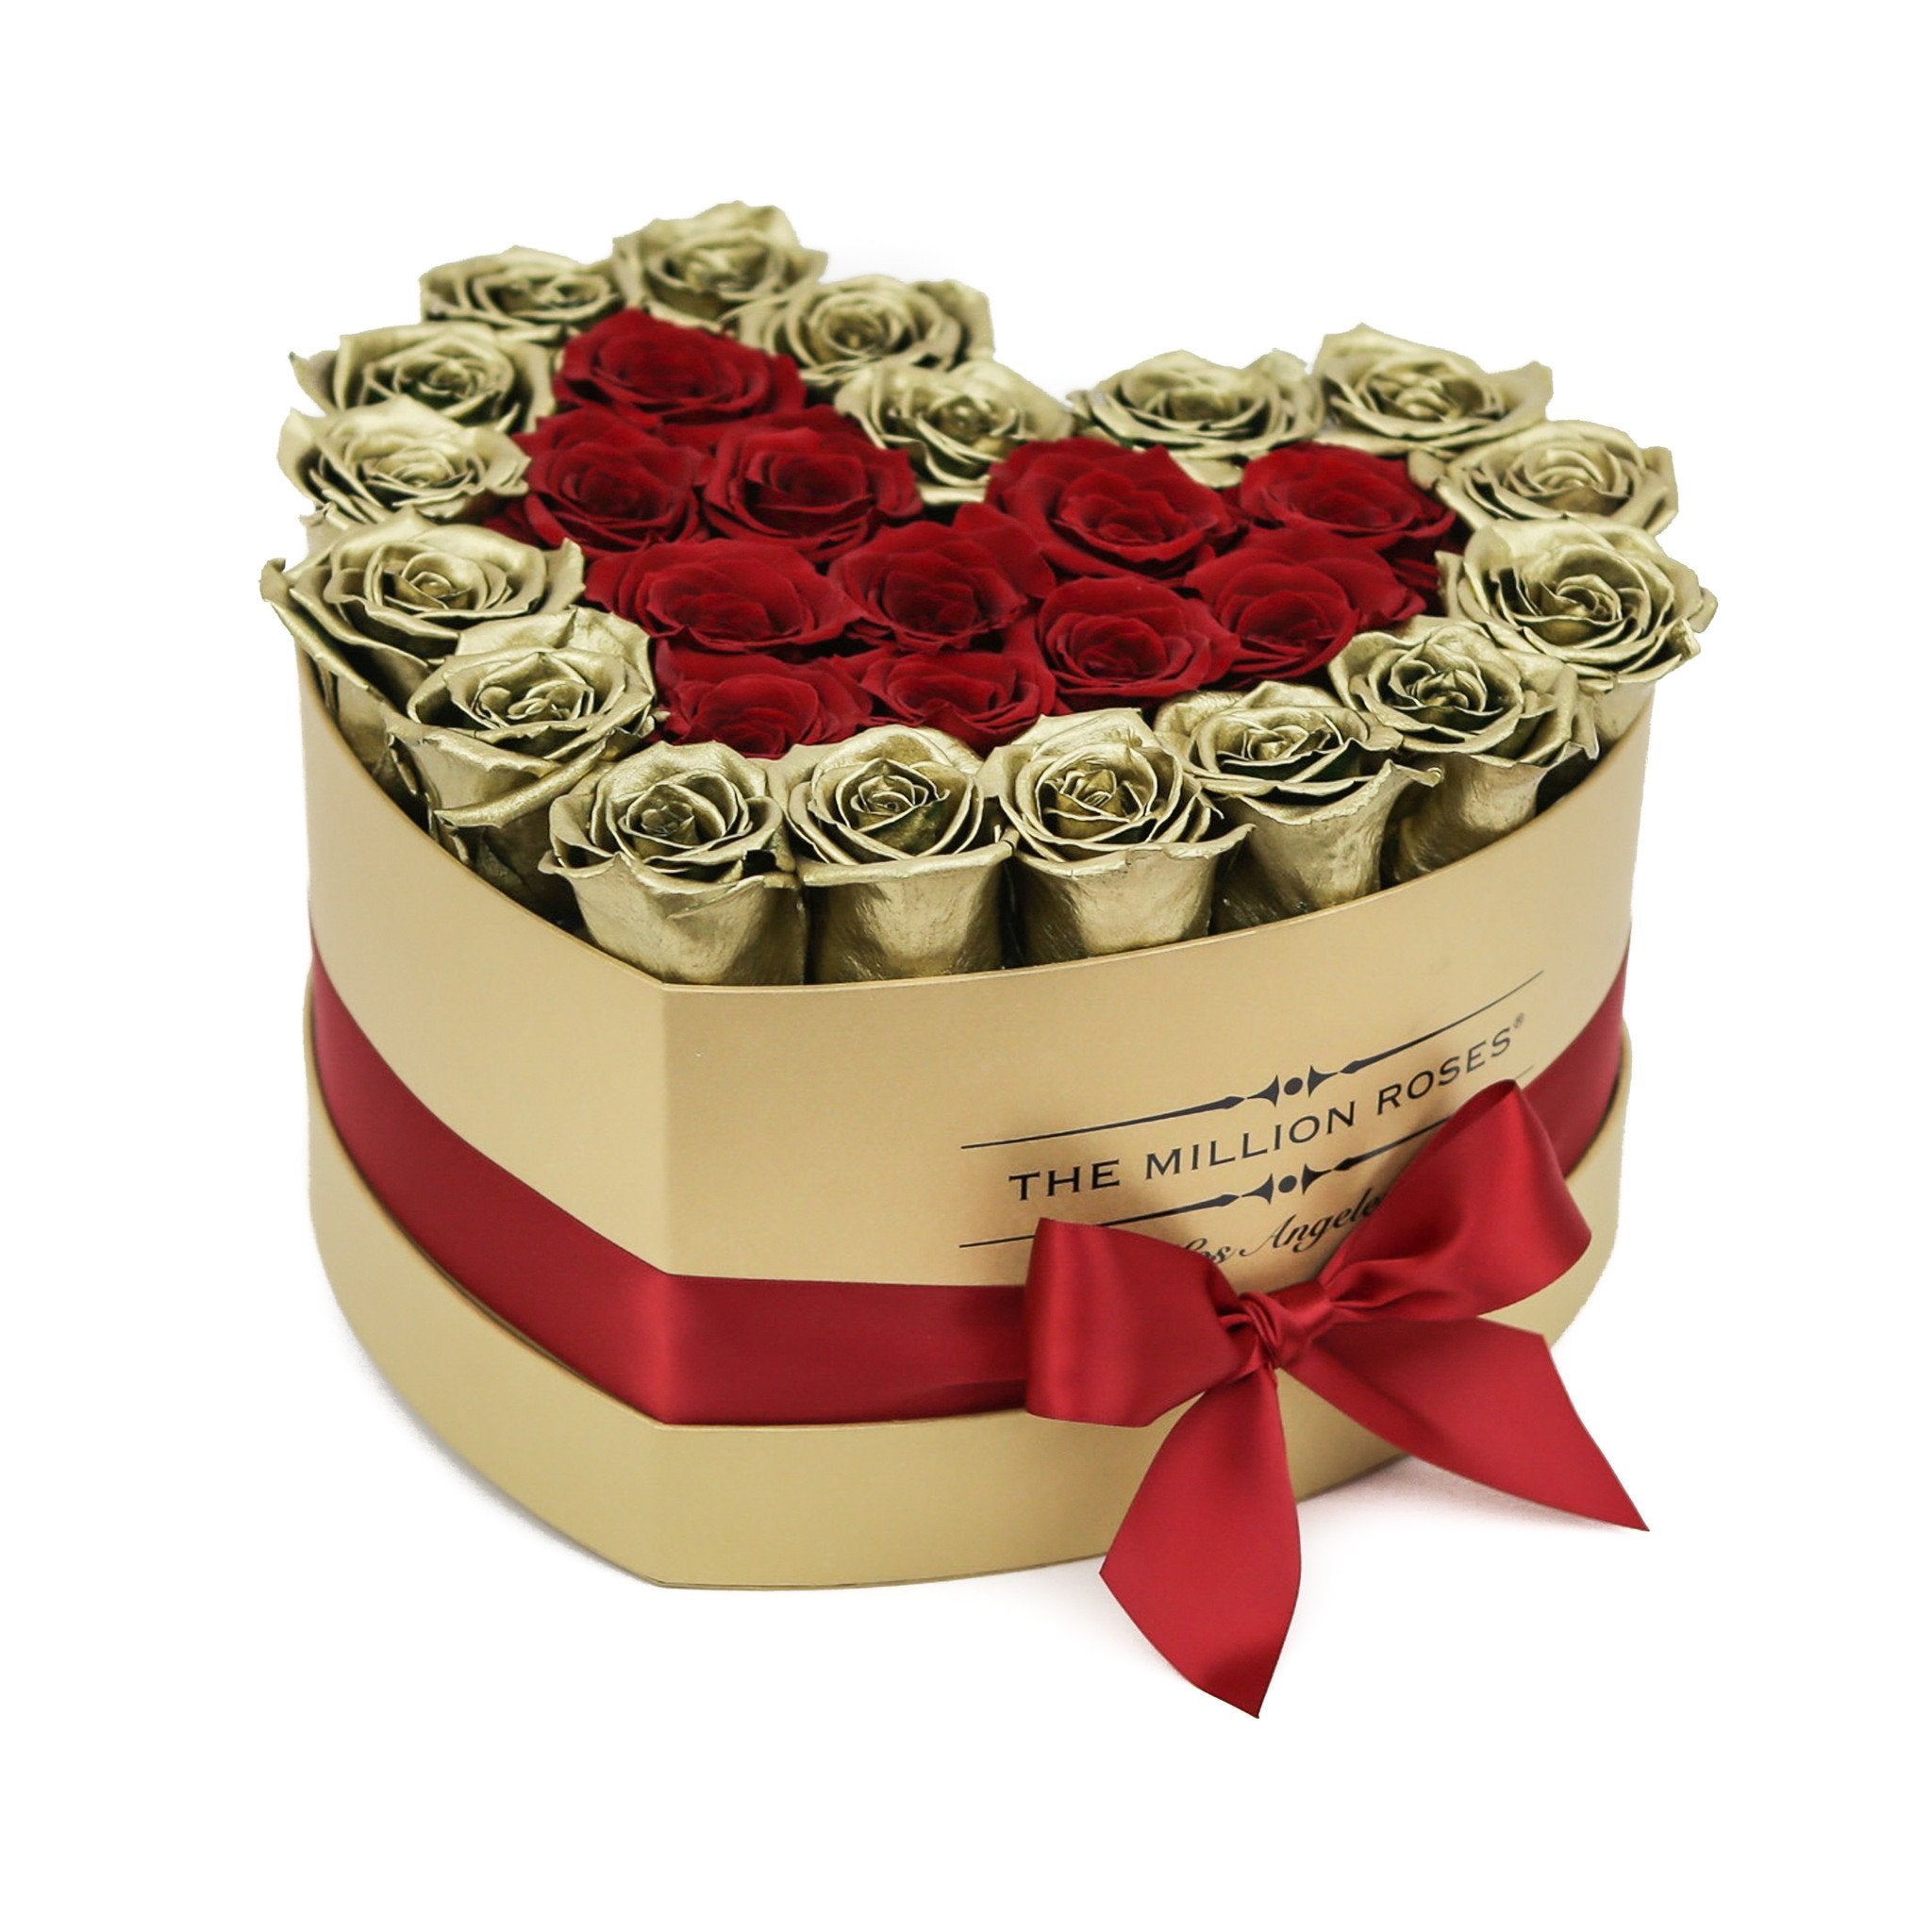 LOVE box - gold - gold&red roses mixed eternity roses - the million roses